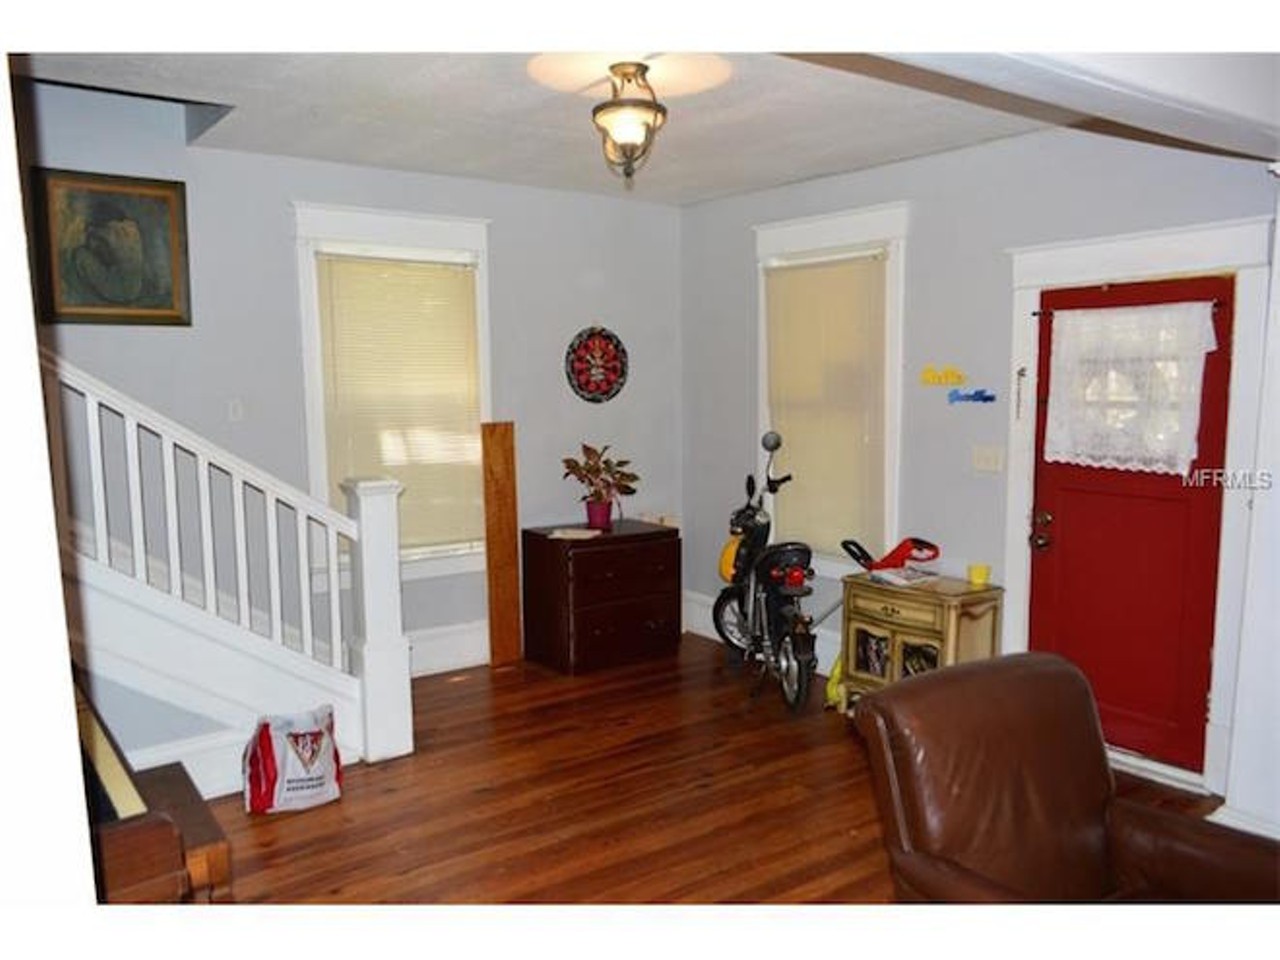 Check out 201 E. 10th St. This home has 2 bedrooms and 2 baths, and the asking price is $109,000.